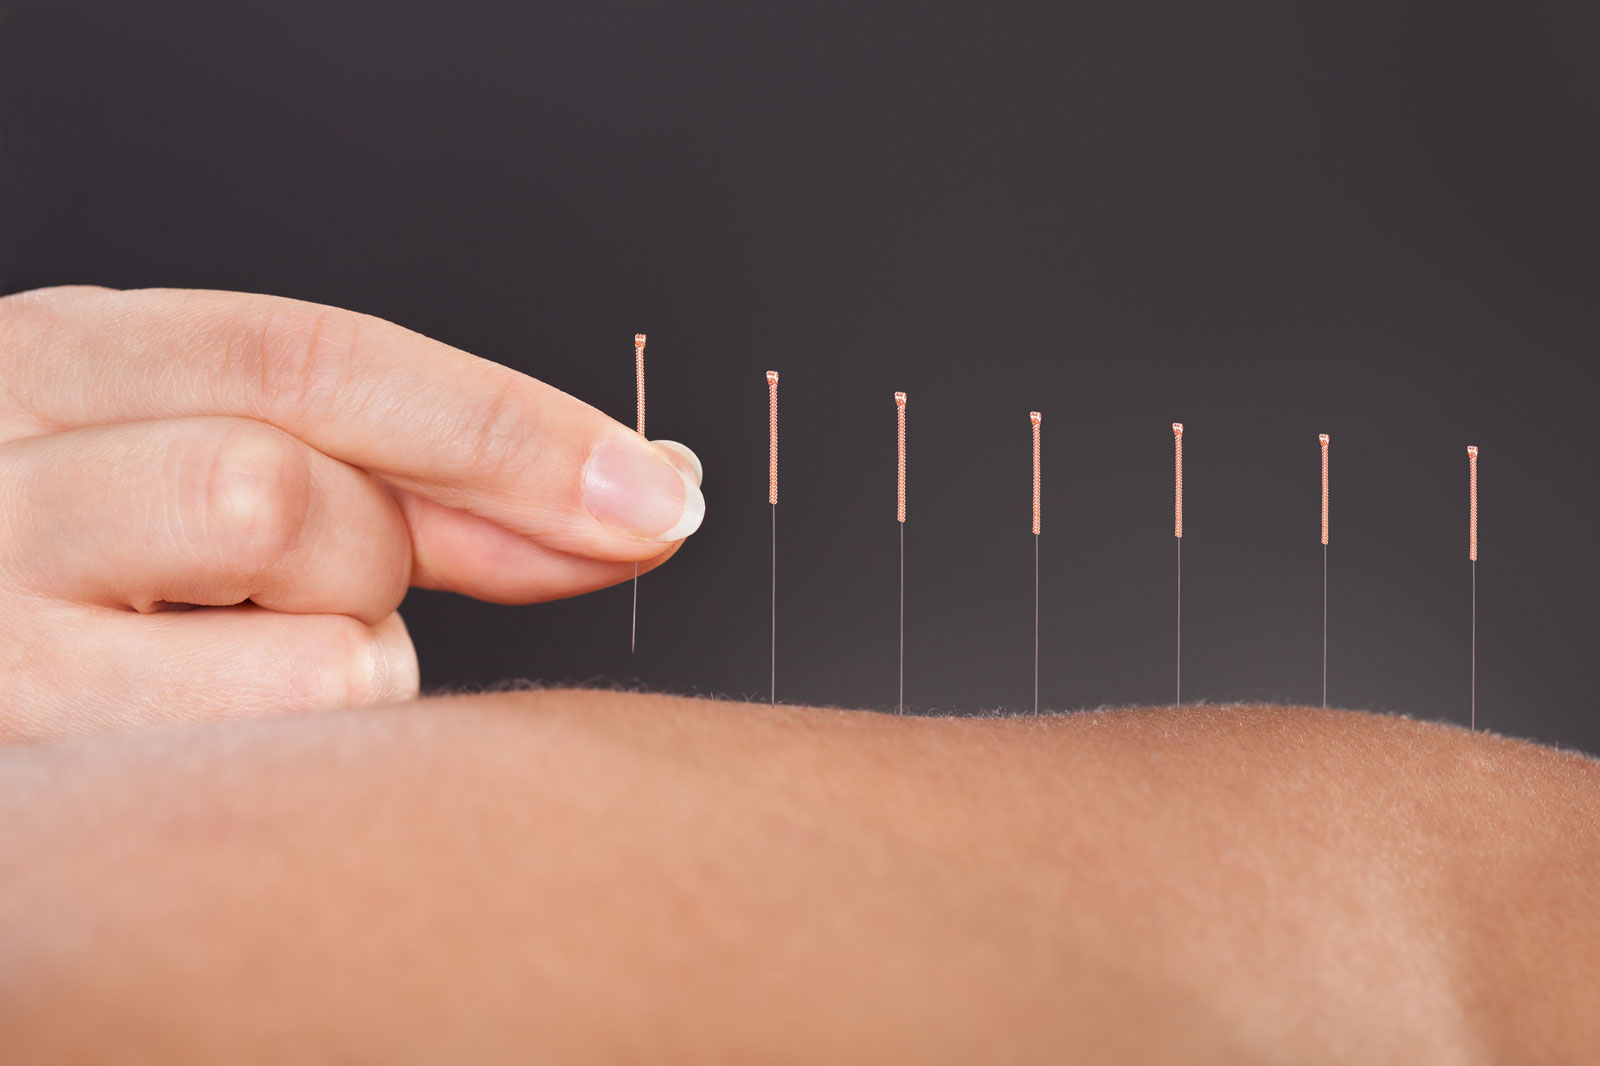 Hand-placing-acupuncture-needles-in-exposed-back